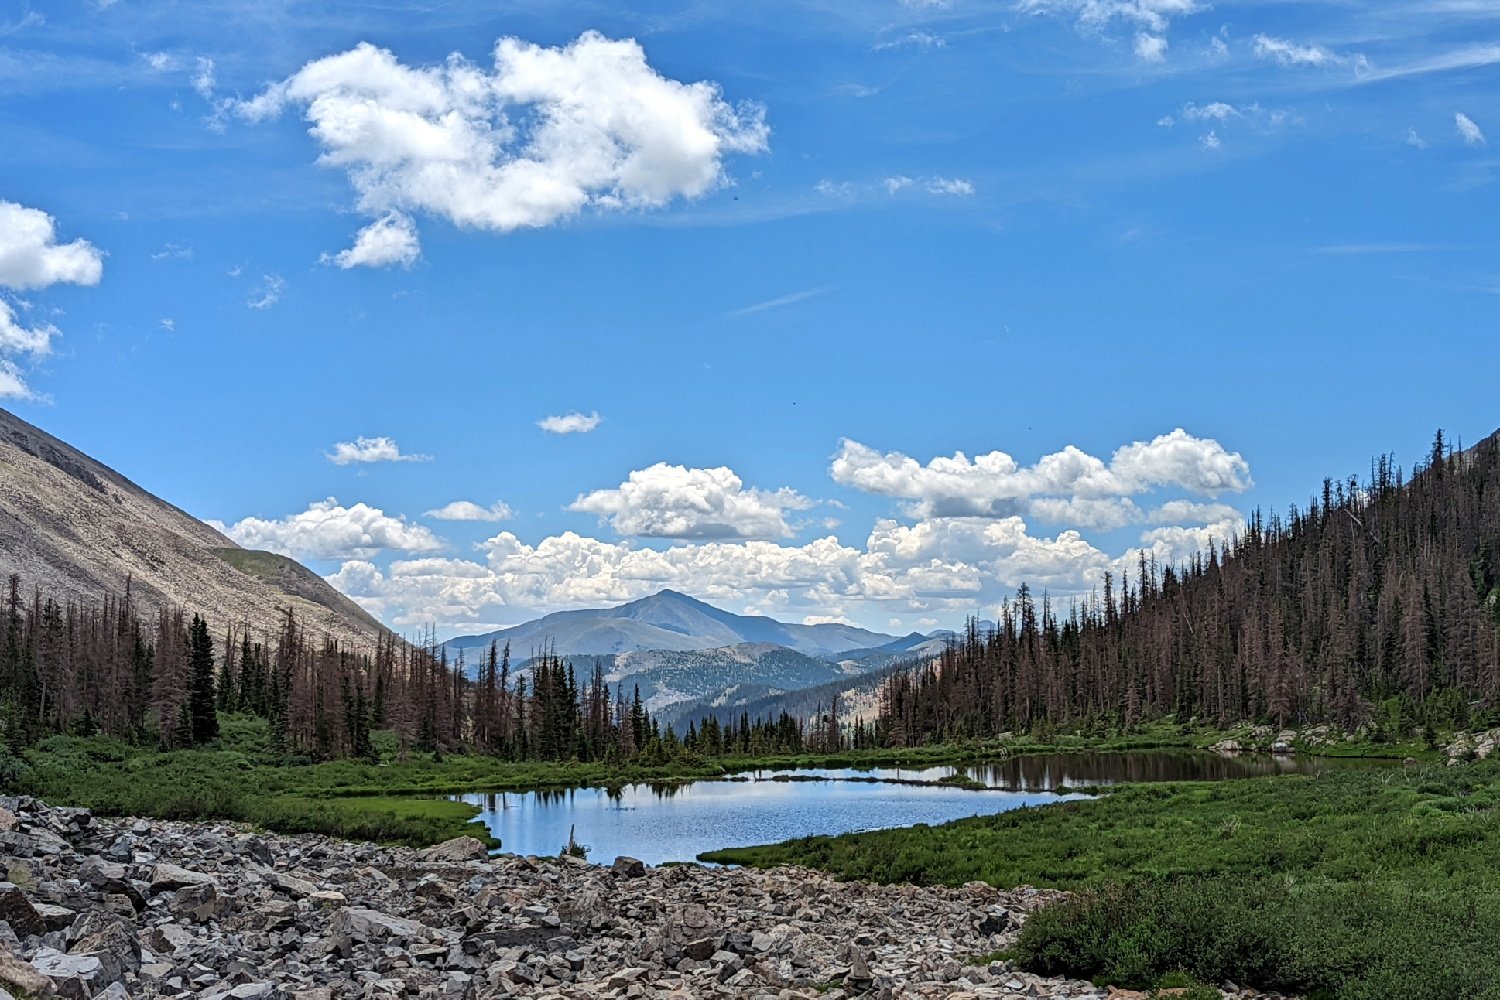 A view of a lake with a mountain in the background on the Colorado Trail